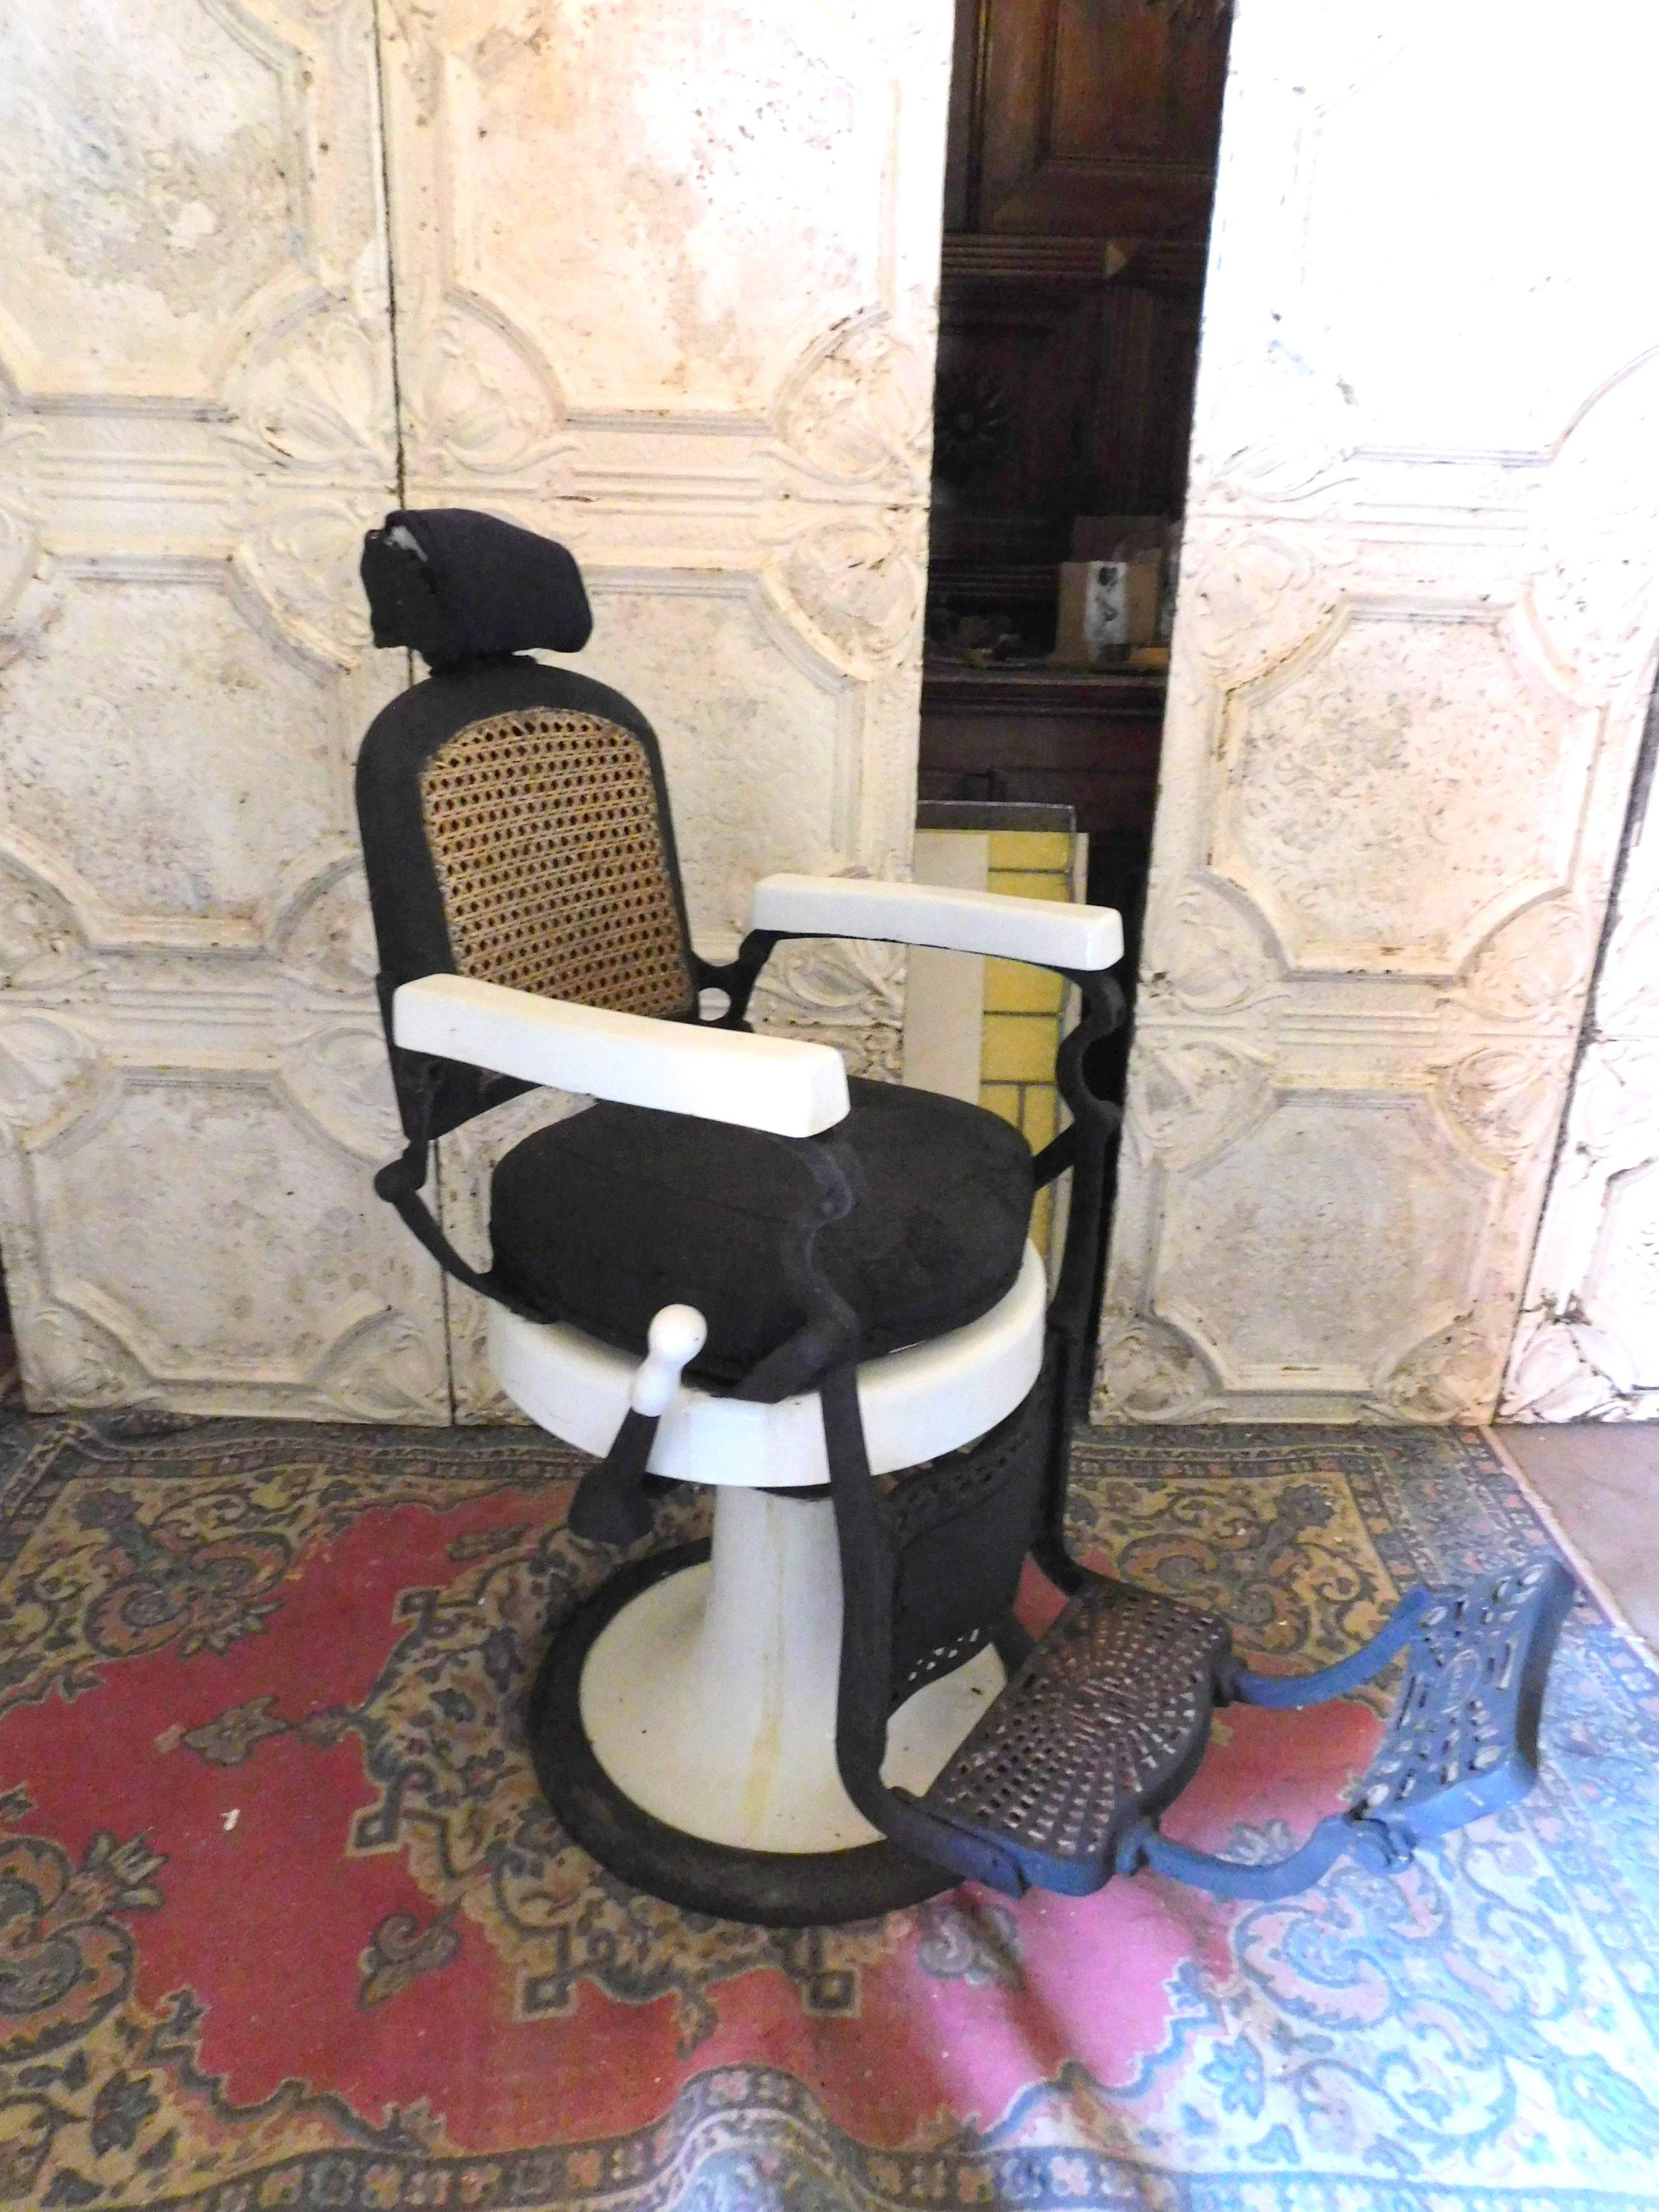 Antique vintage barber chair from the 1950s, in ceramic with backrest in woven wicker, rotatable structure with footrest in beautiful sculpted cast iron, produced for a barber shop in 1950 in Italy.
Beautiful, charming and suitable for a prominent